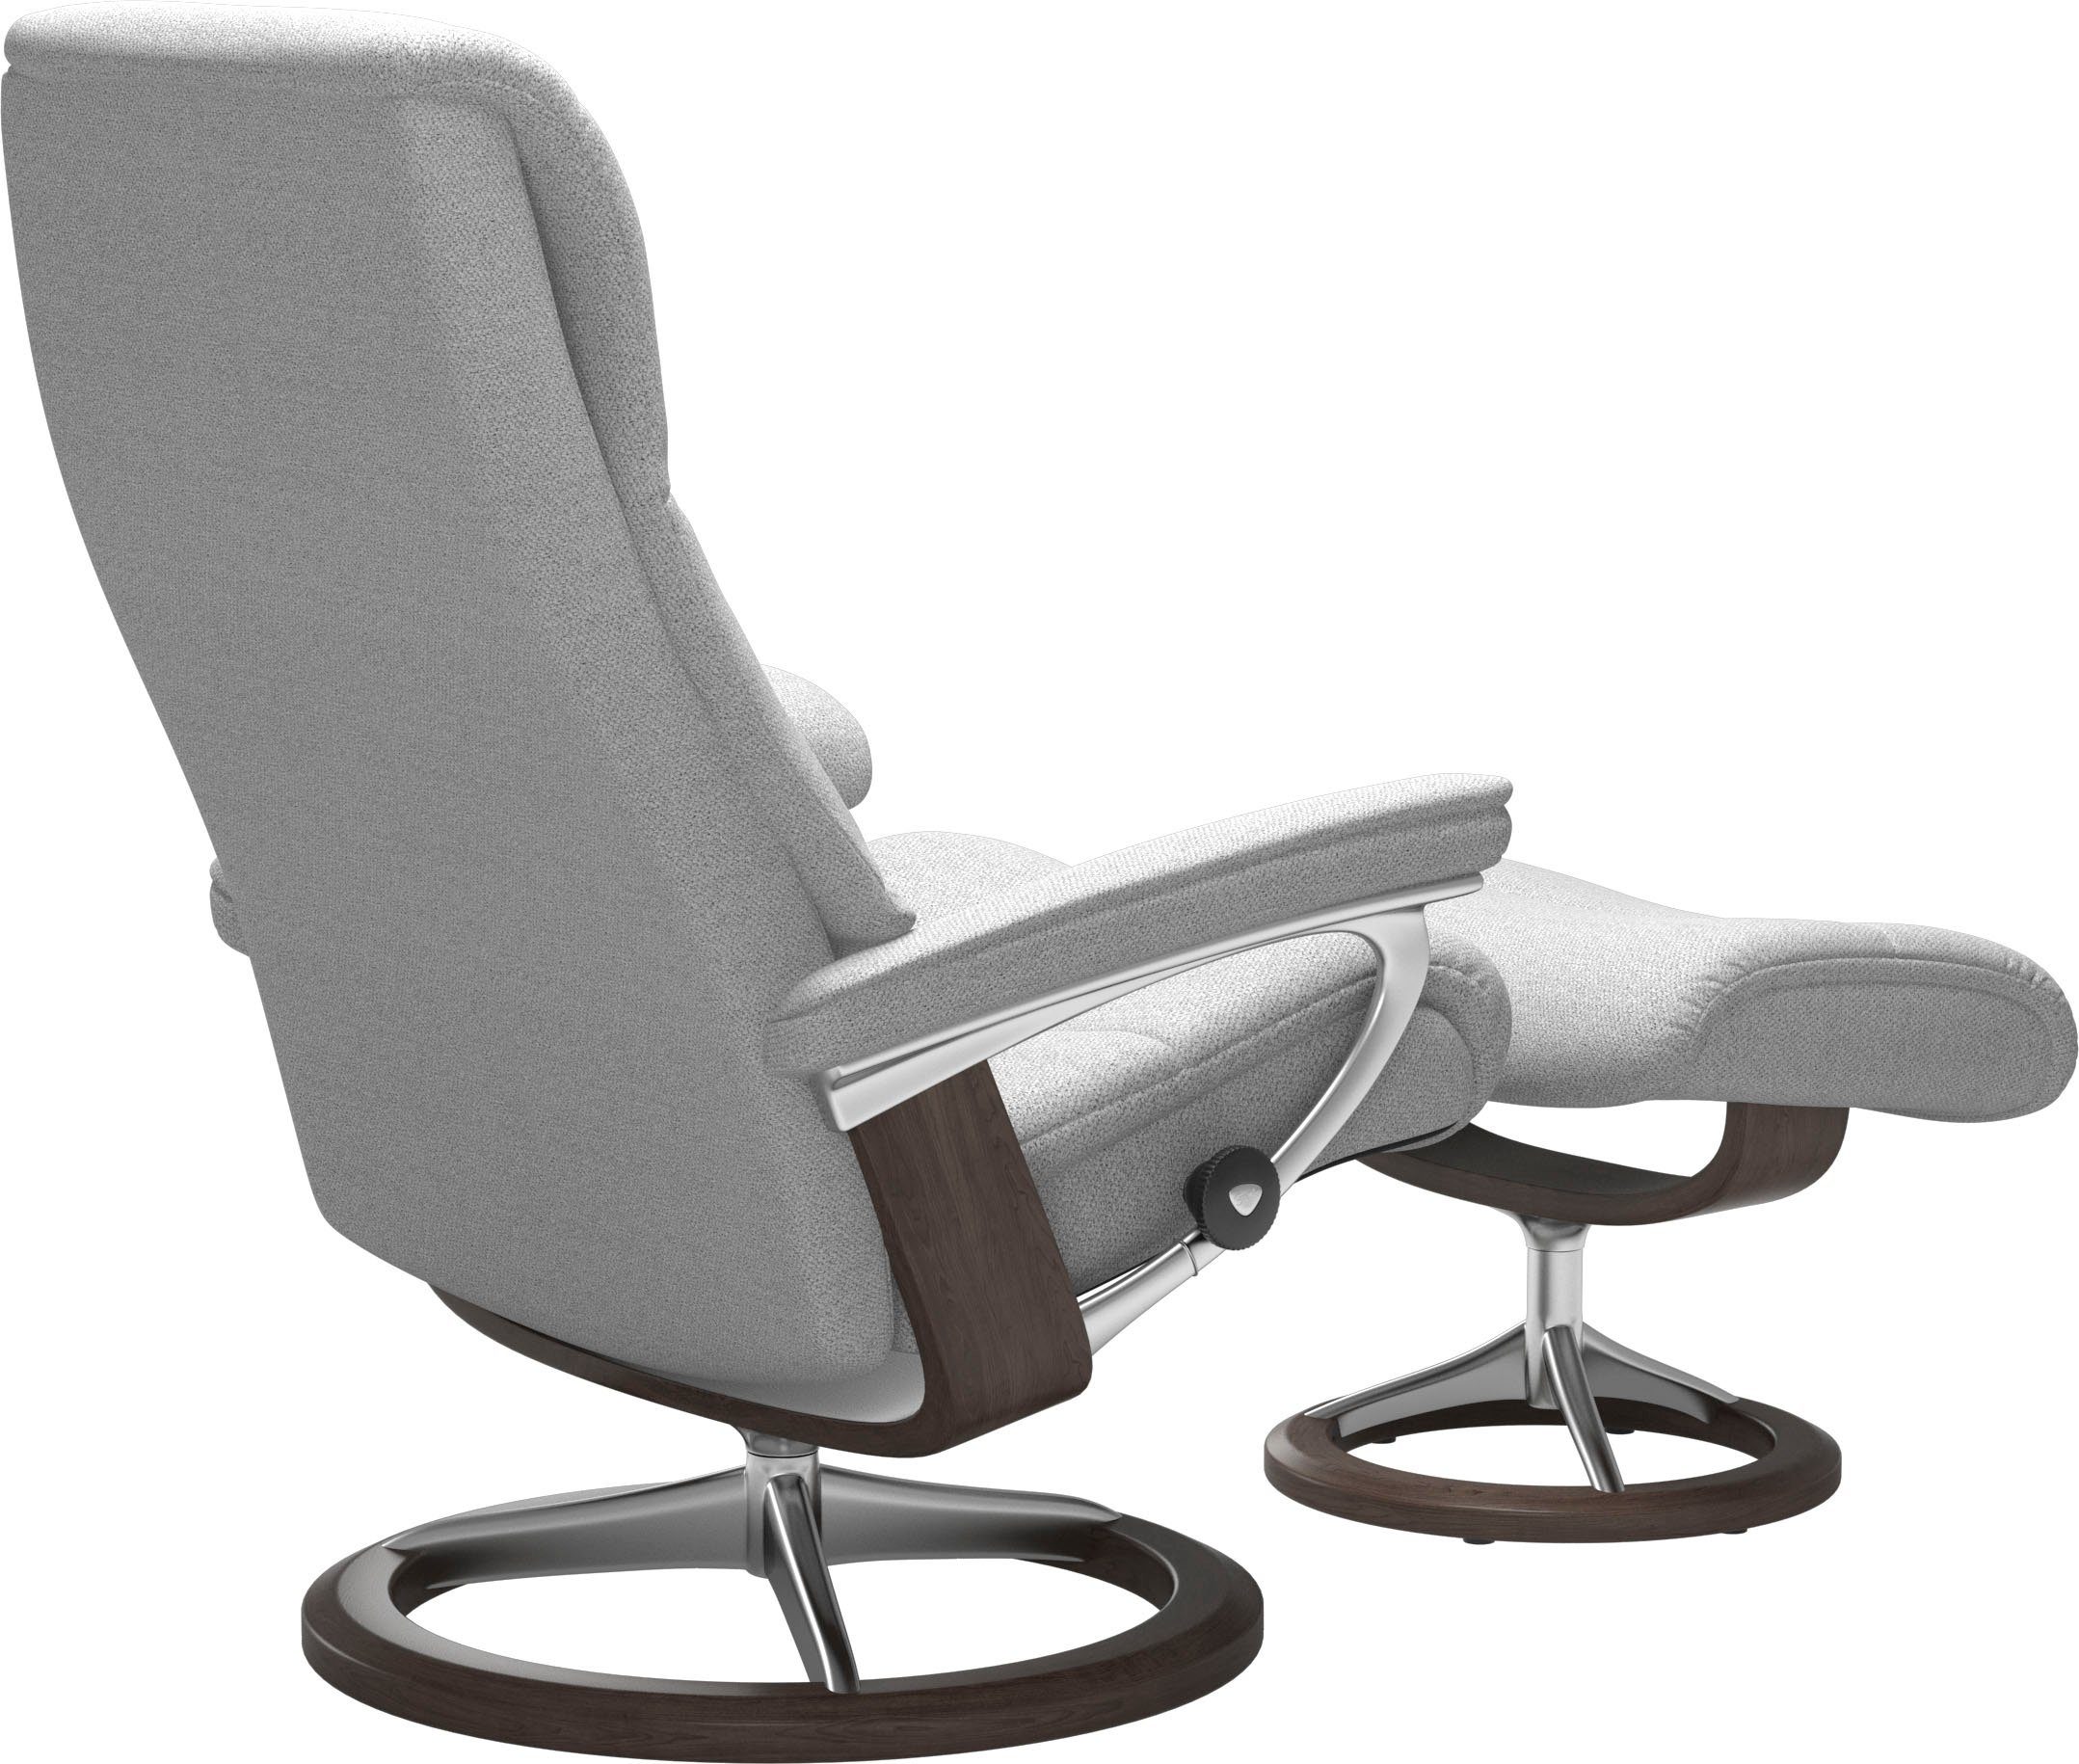 Signature S,Gestell View, Wenge Base, Relaxsessel Stressless® mit Größe